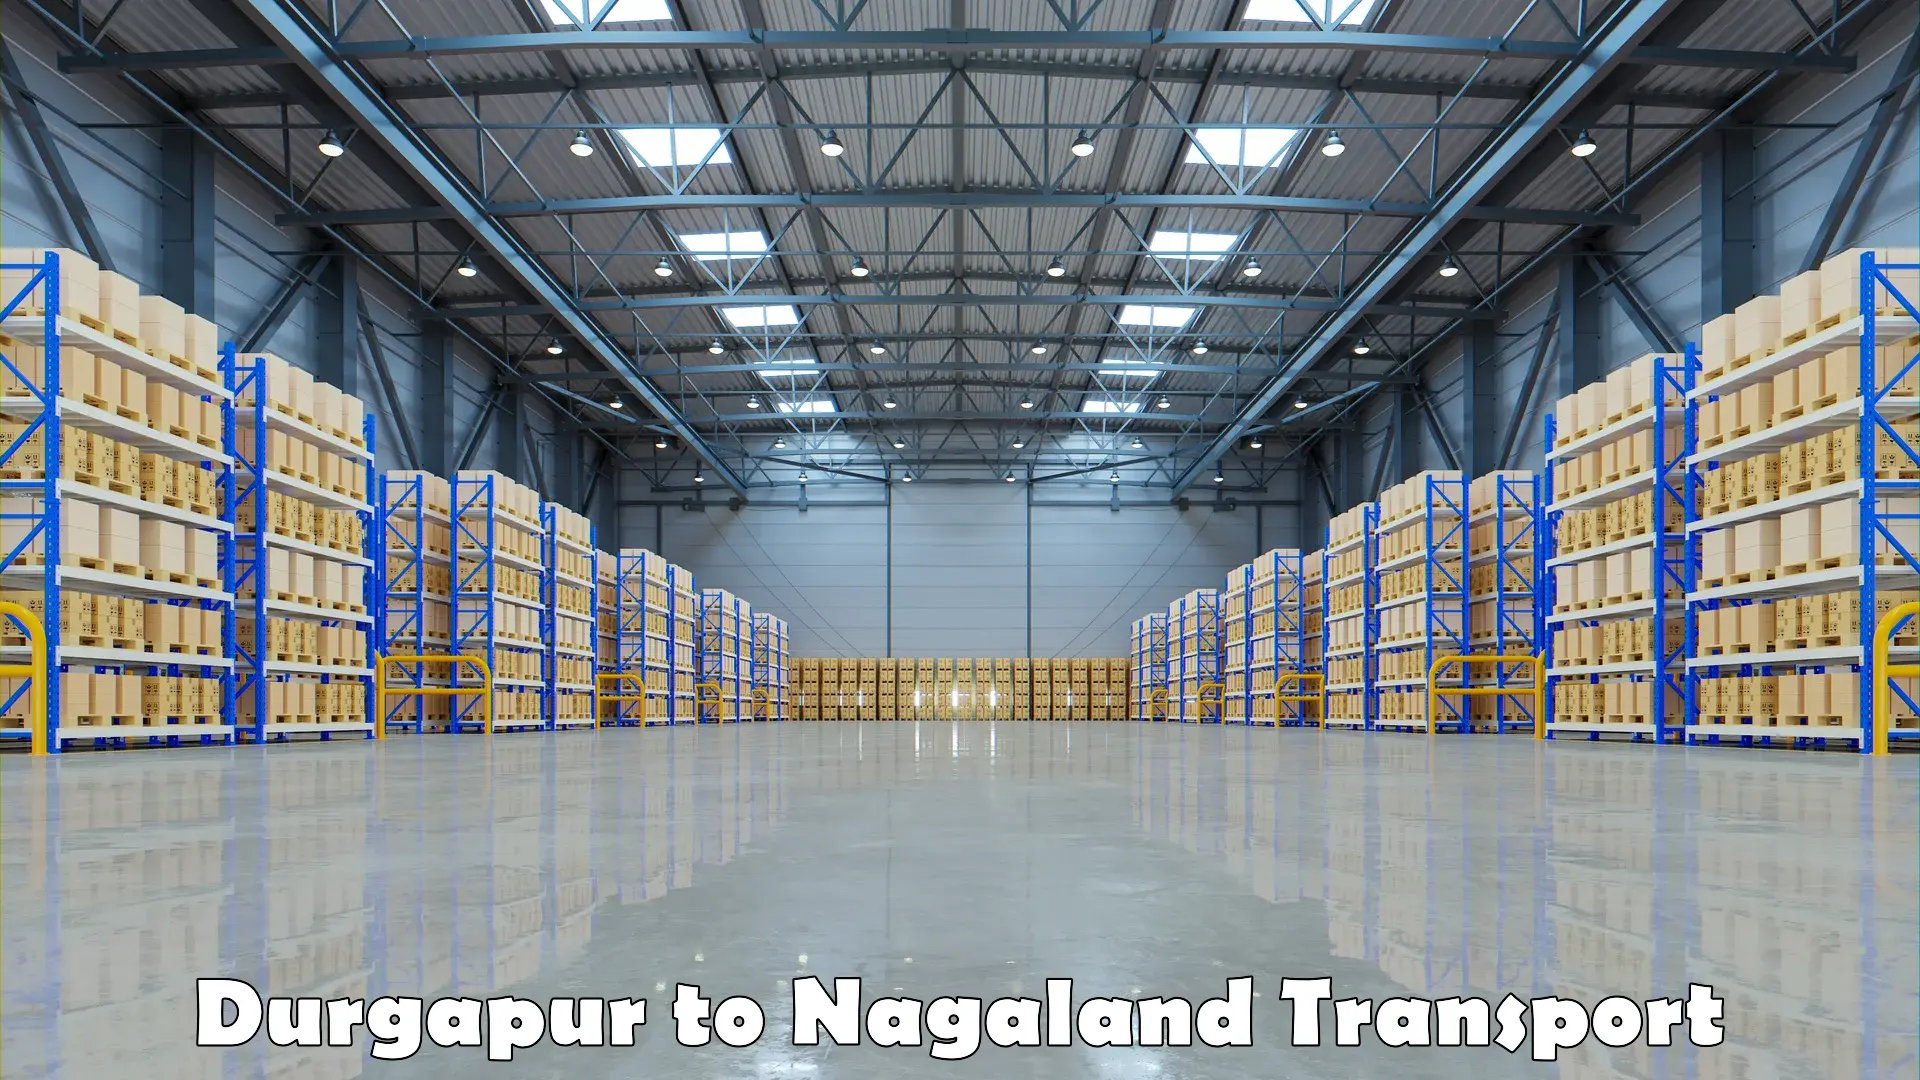 Nearby transport service Durgapur to Nagaland